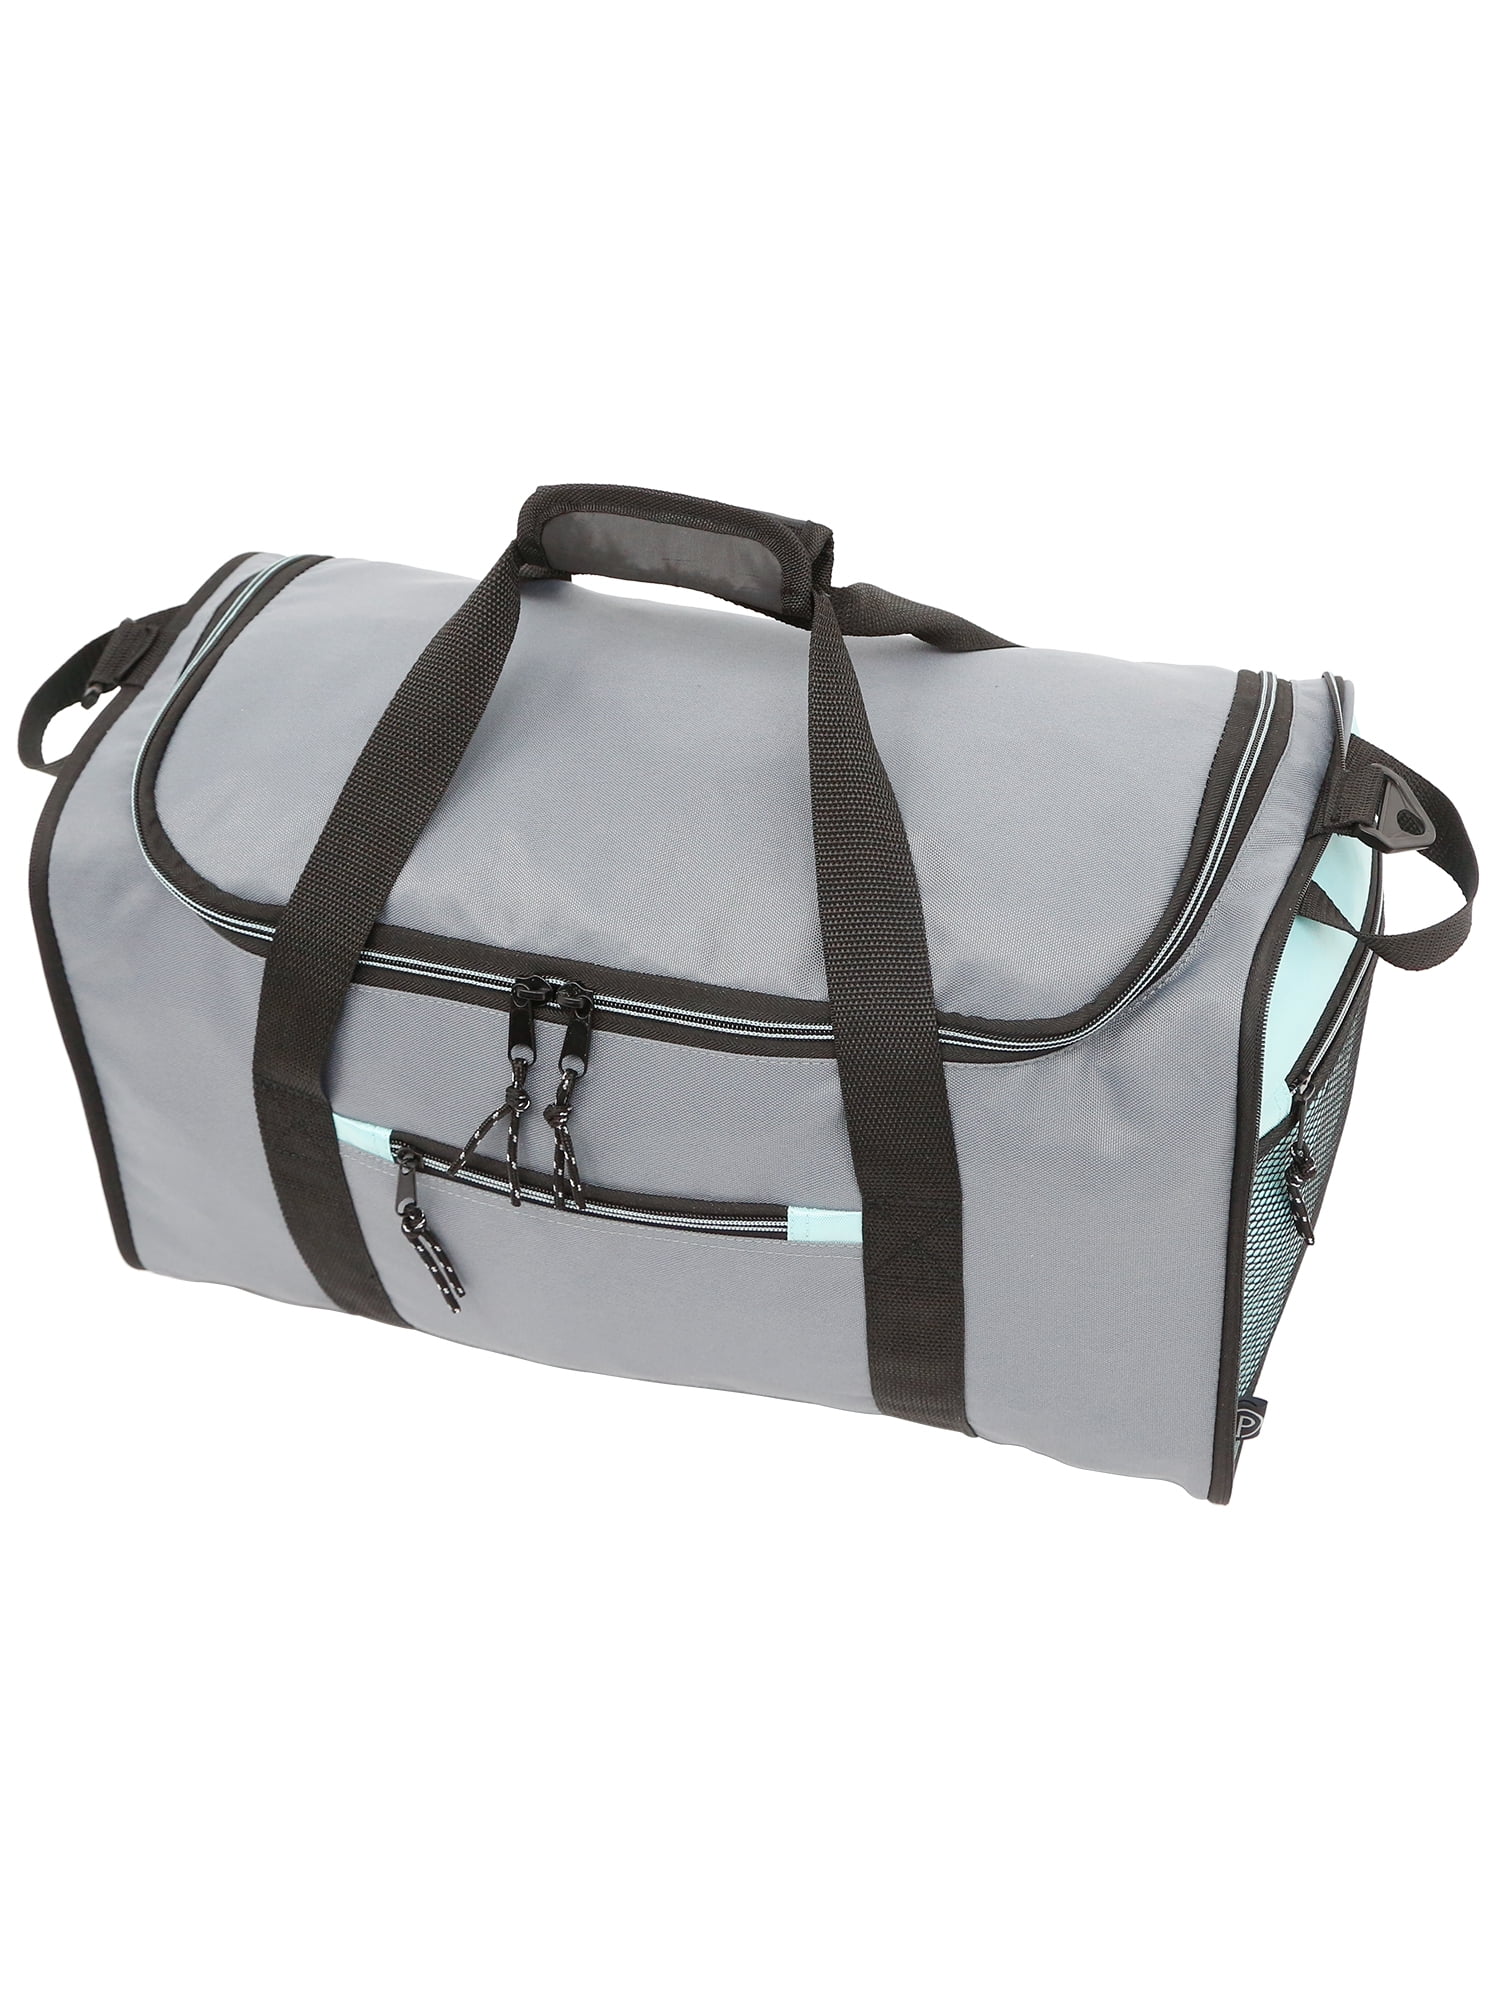 Protégé 20 Collapsible Sport and Travel Duffel Bag, Gray